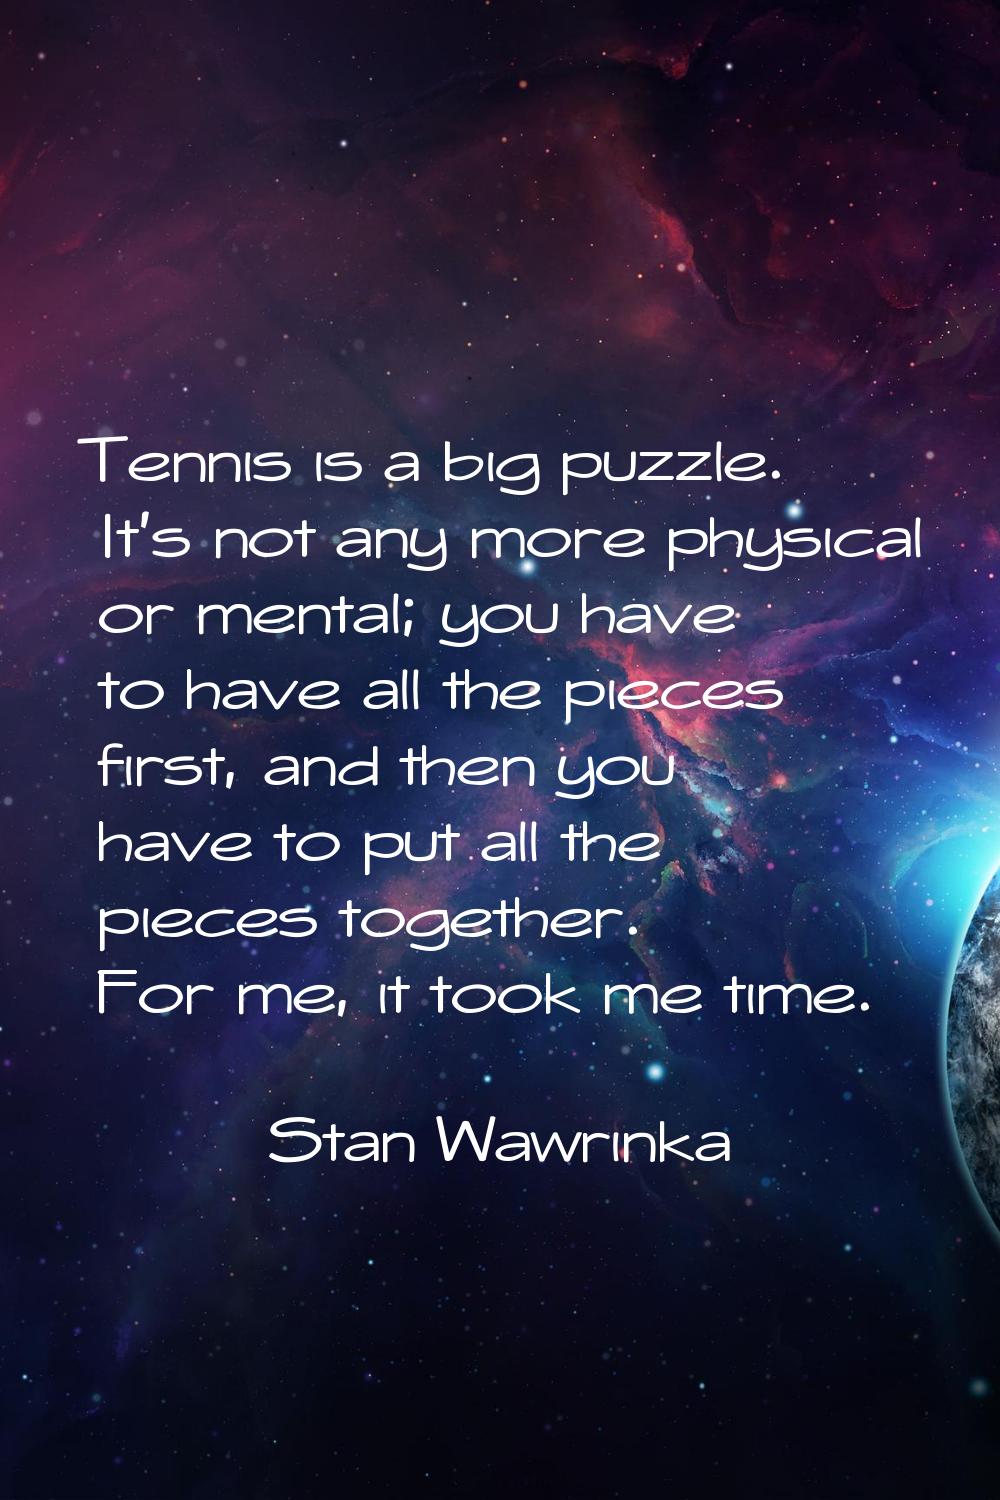 Tennis is a big puzzle. It's not any more physical or mental; you have to have all the pieces first